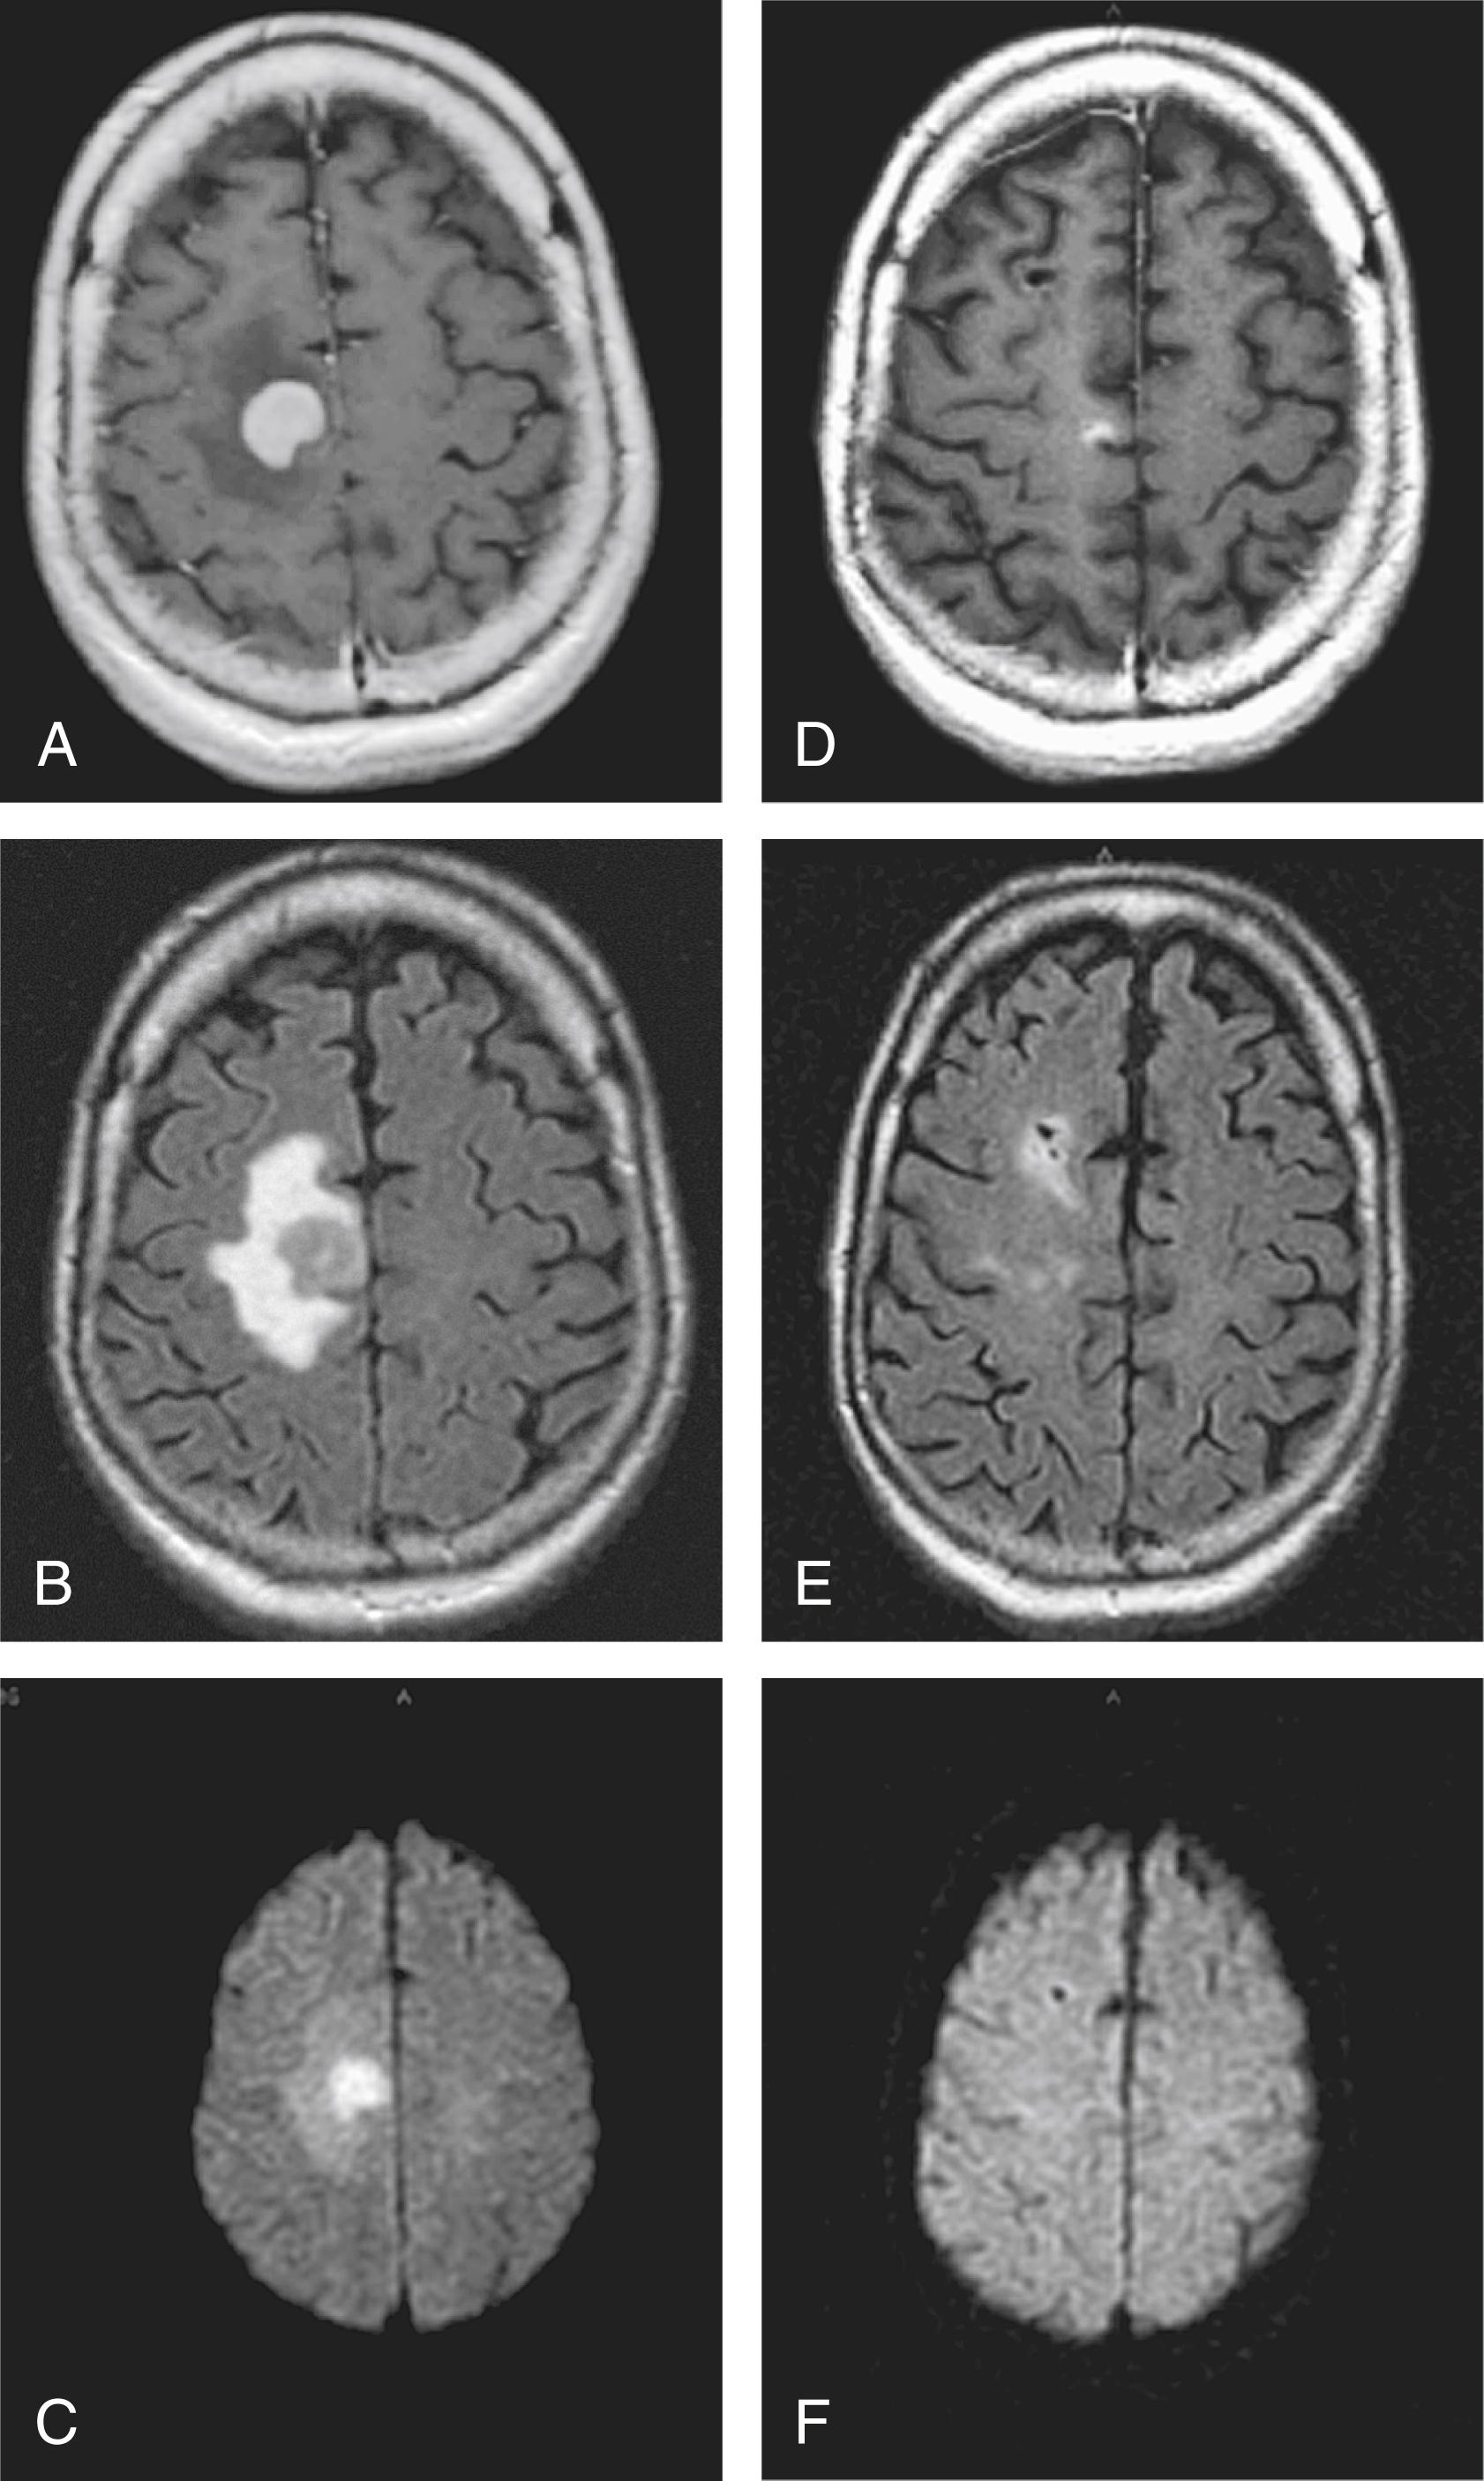 FIGURE 9.3, T1-enhanced (A), FLAIR (B), and DWI (C) magnetic resonance imaging of patient with primary central nervous system lymphoma at the time of diagnosis (A, B, and C) and after five cycles of chemotherapy (D, E, and F).